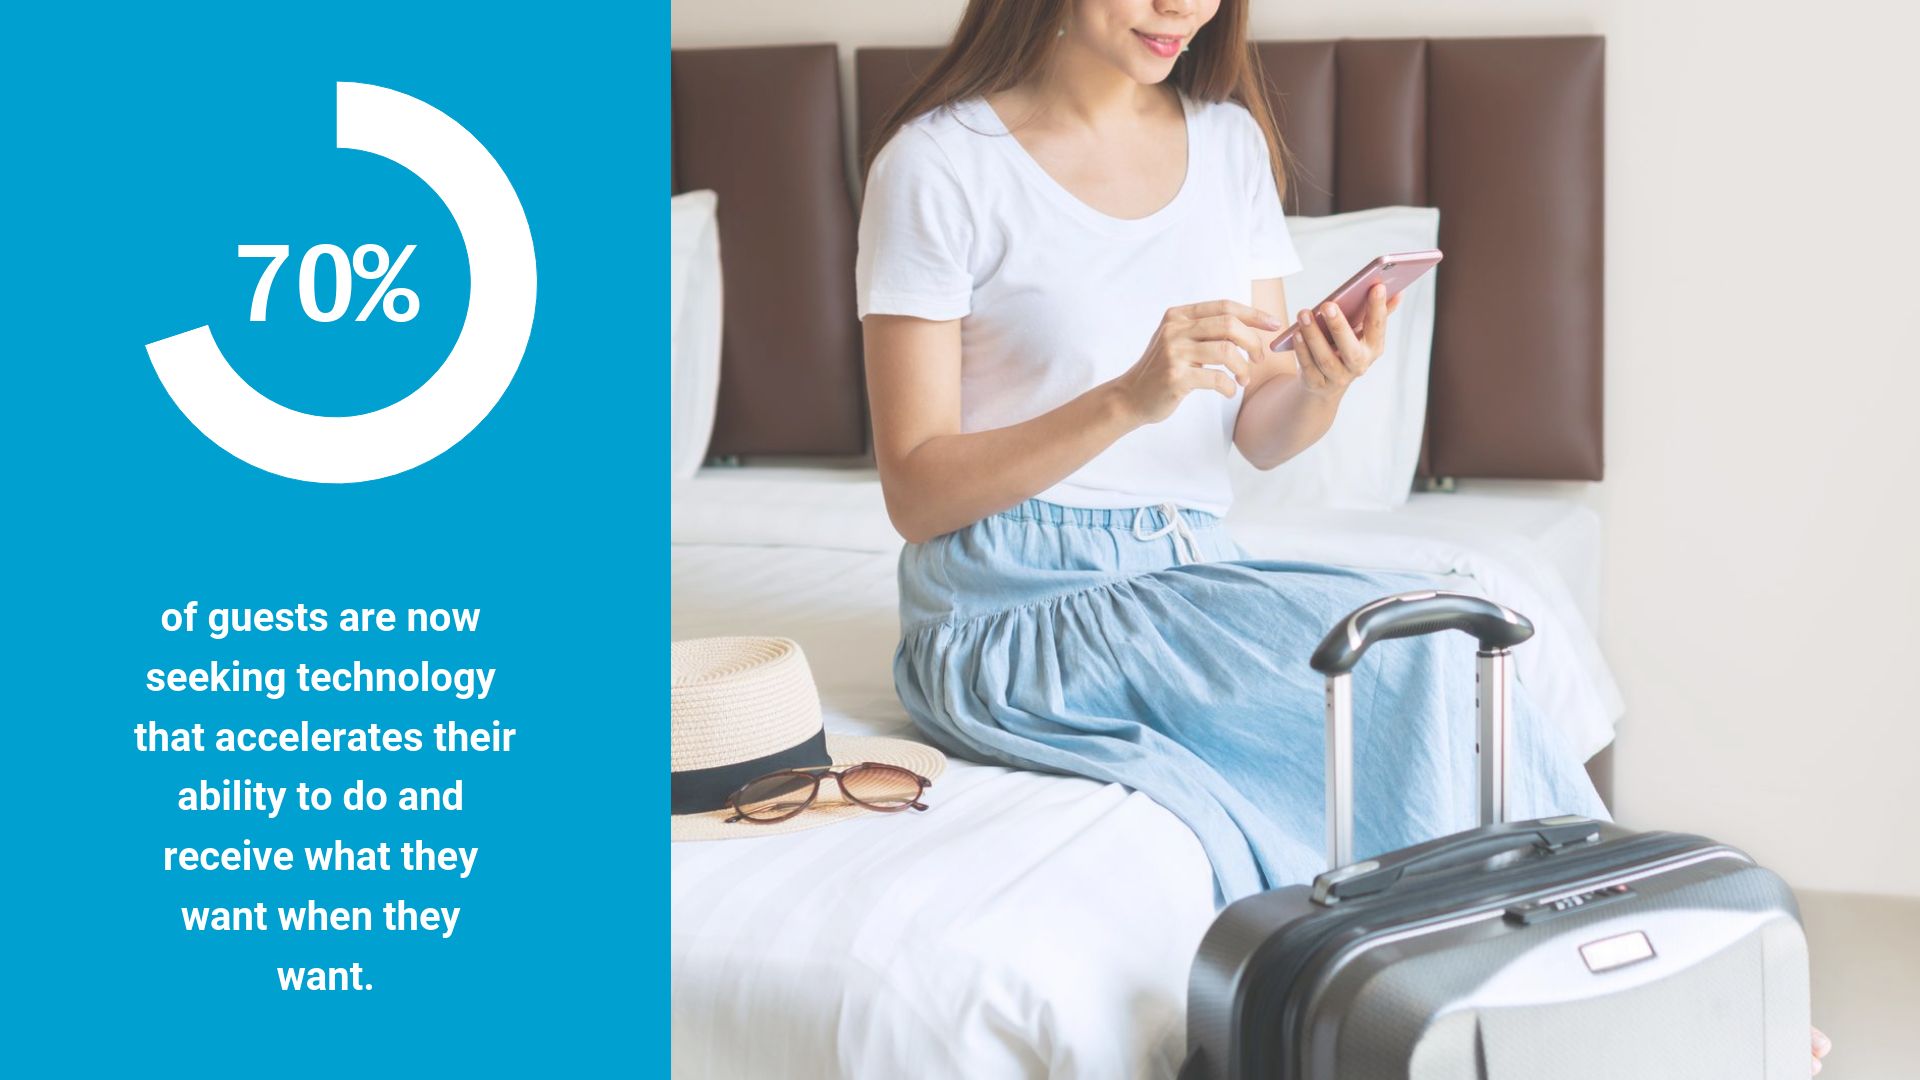 Mapping Out Guest Journeys With IoT